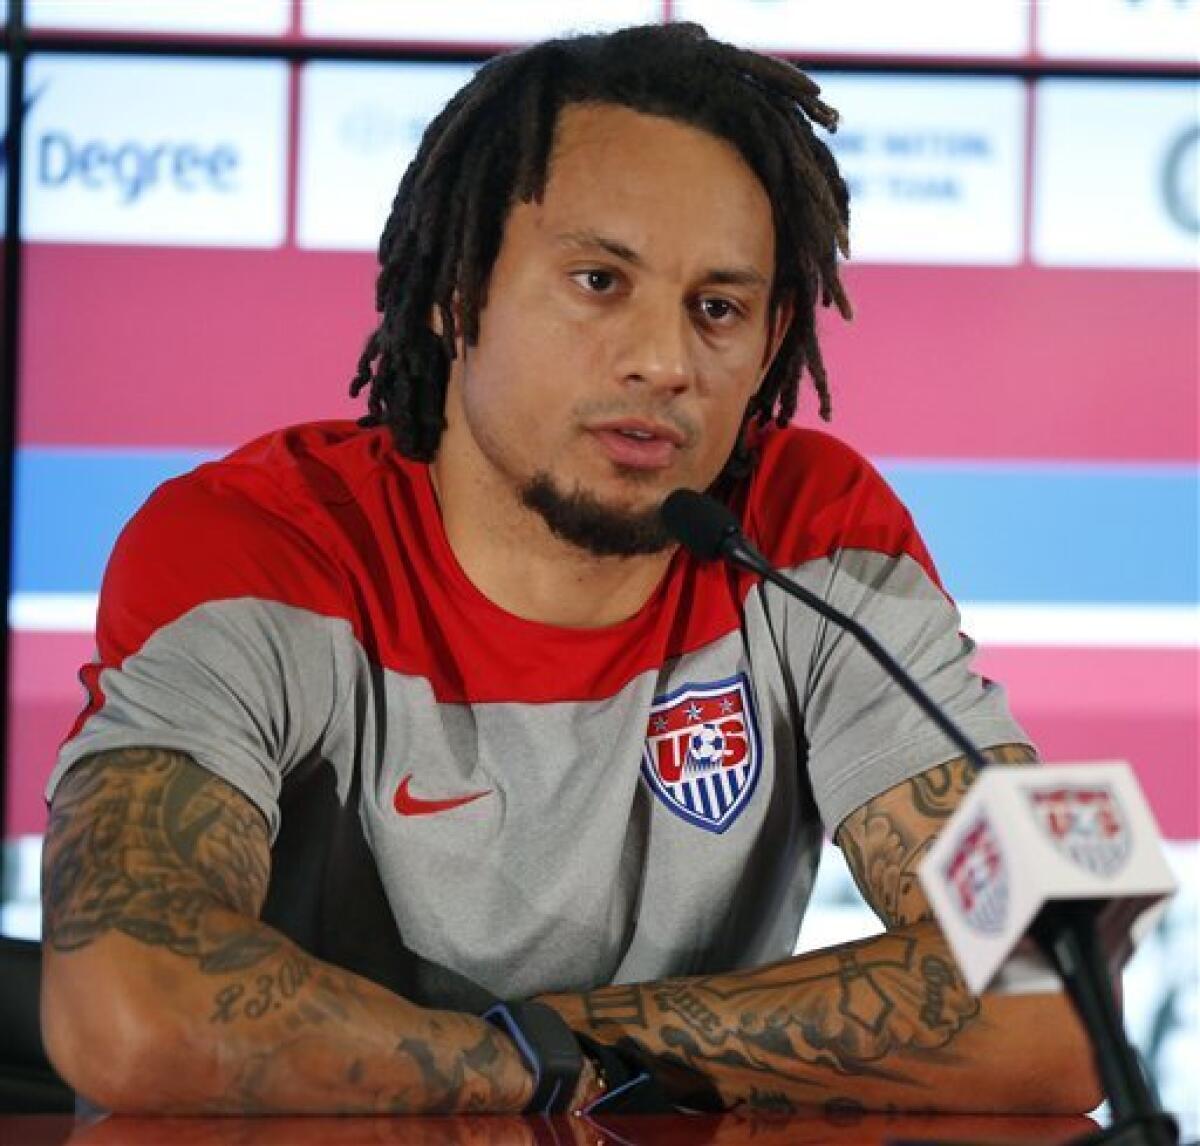 Jermaine Jones talks during a news conference before a U.S. national team training session in Sao Paulo, Brazil, on June 19, 2014.